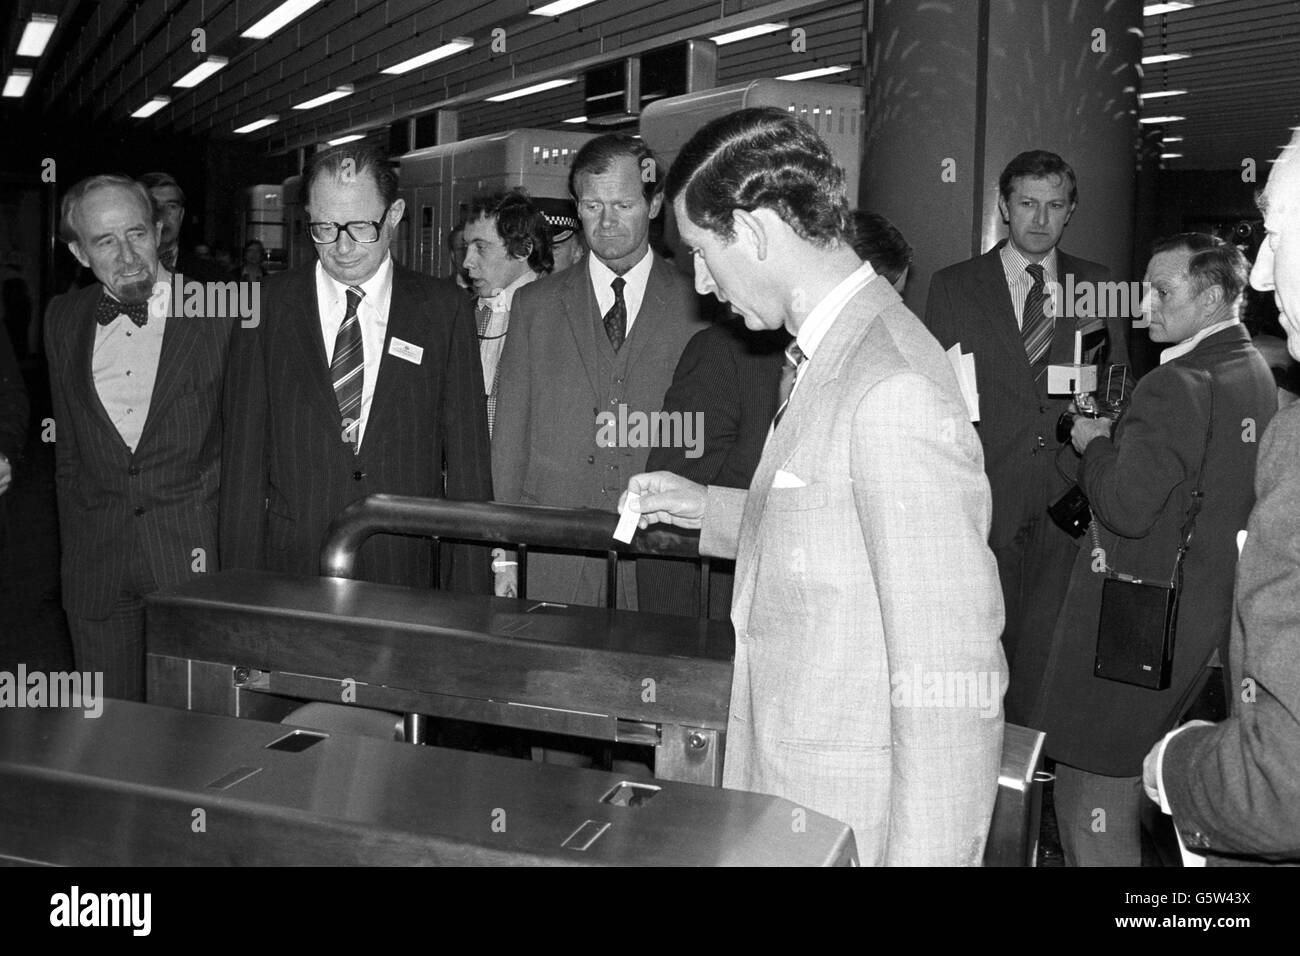 Royalty - Prince Charles - Charing Cross Underground Station, London. 87m Jubilee Line. Stock Photo